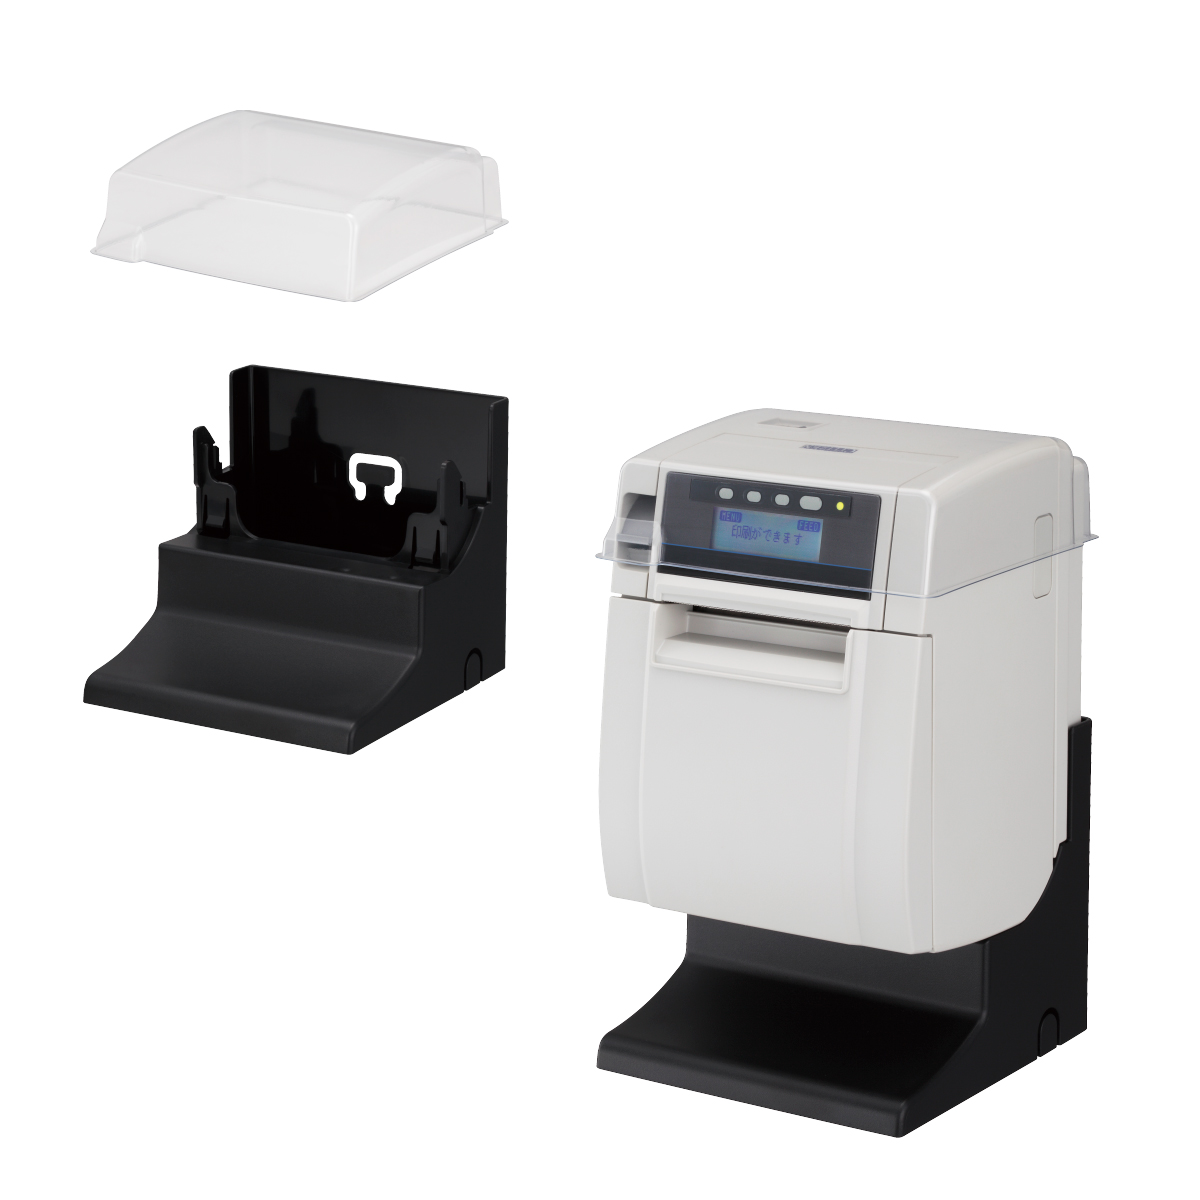 Zebra ZP450 (ZP 450) Label Thermal Bar Code Printer USB, Serial, and Parallel Connectivity 203 DPI Resolution Made for UPS WorldShip Includes Je - 1